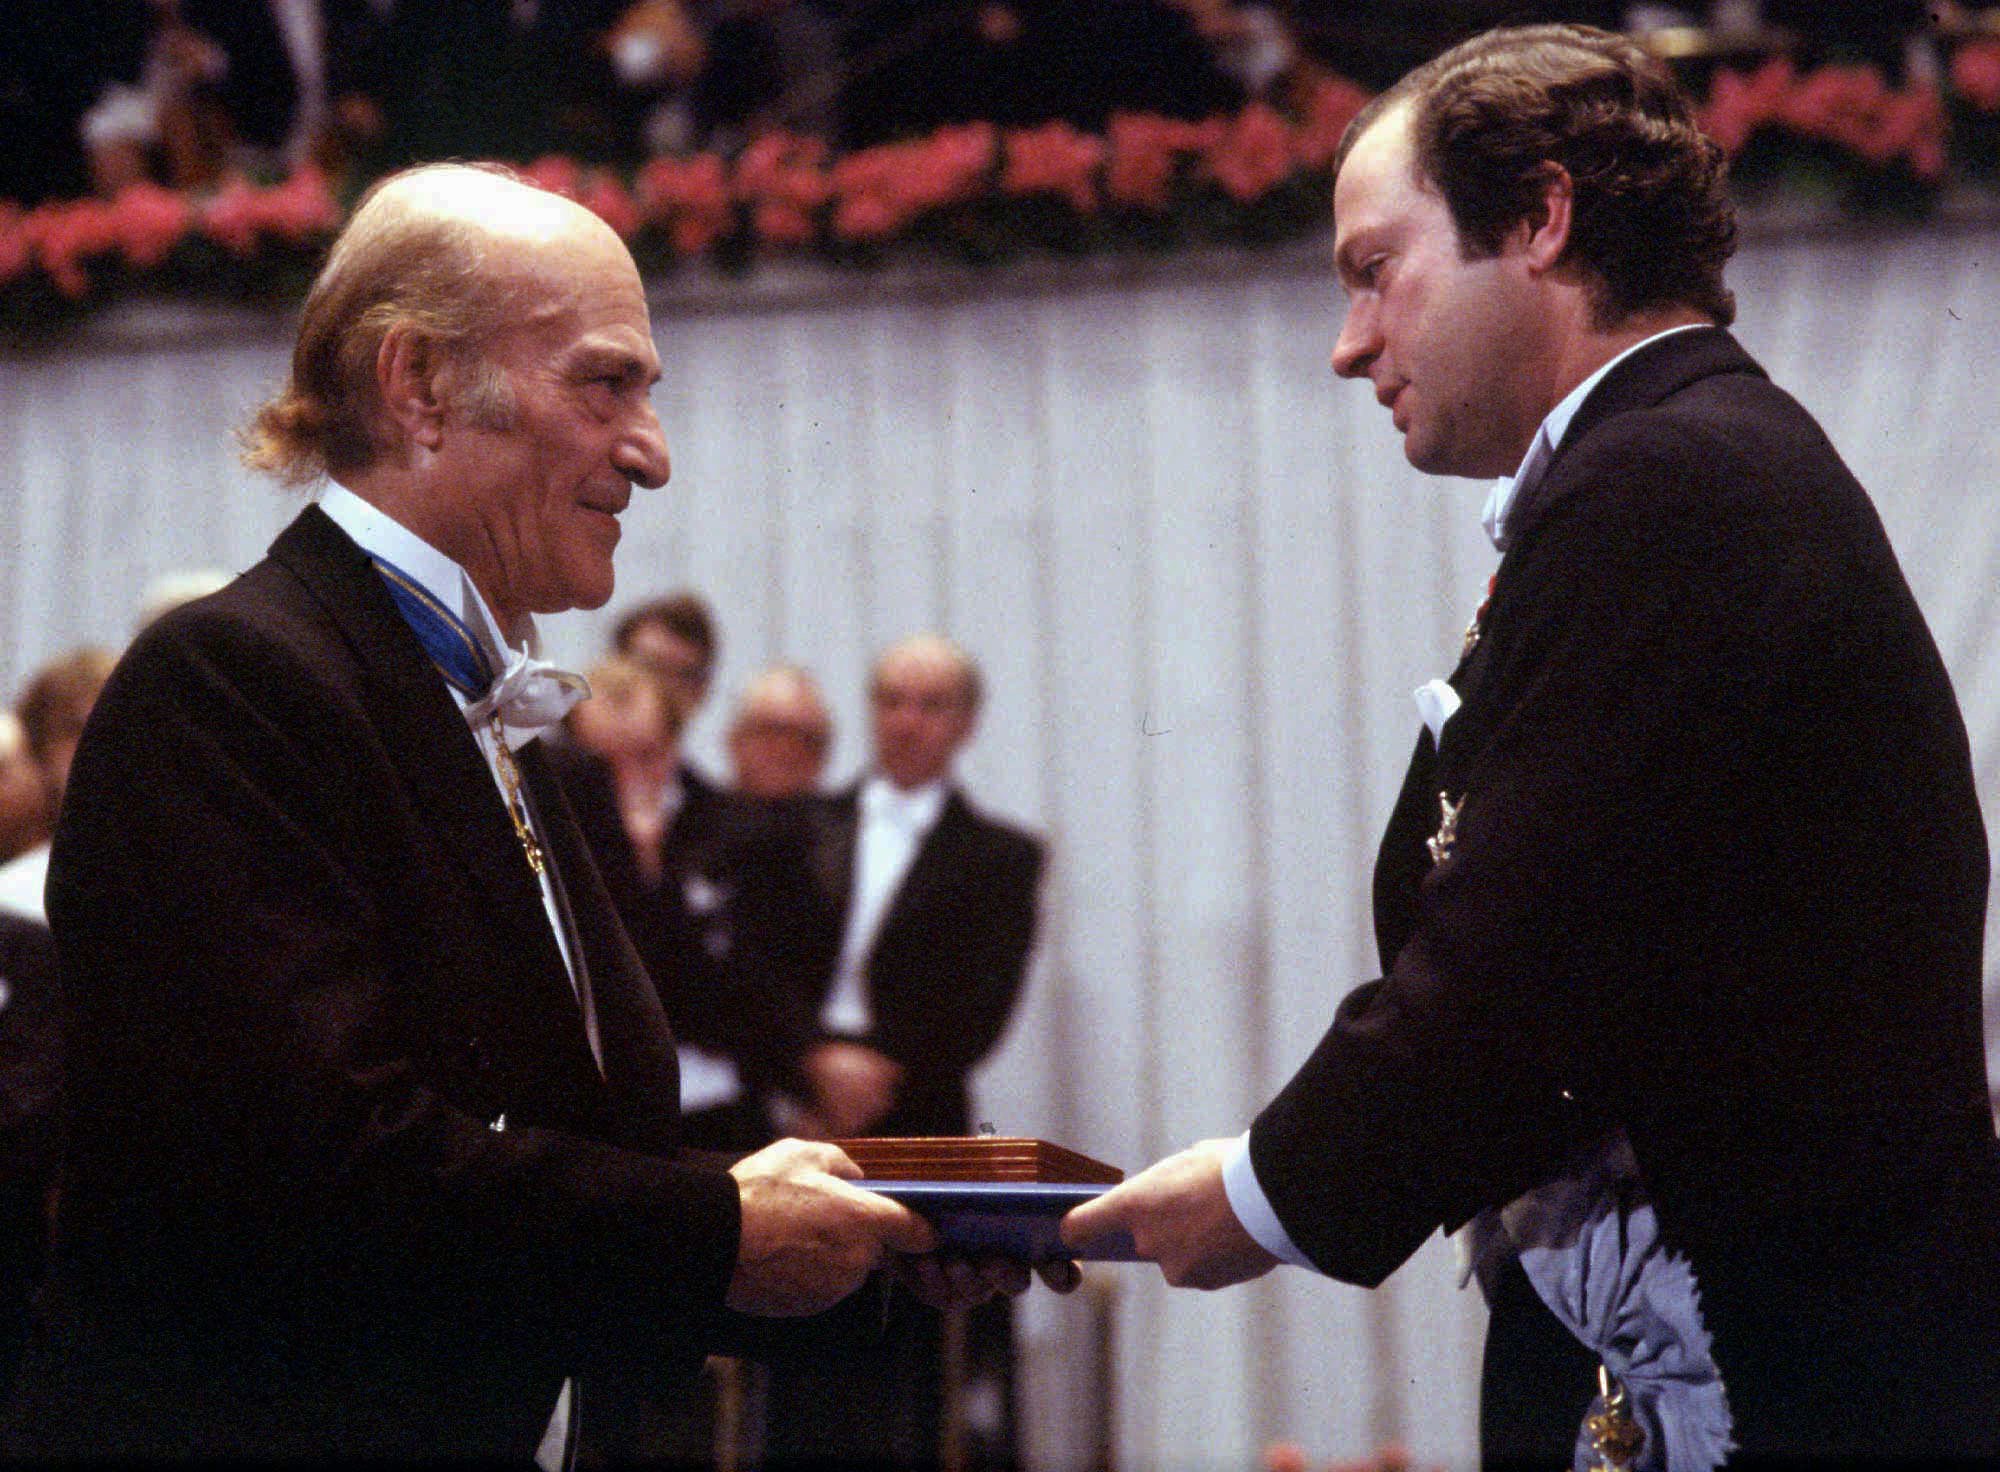 FILE - Greek poet Odysseus Elytis, left, receives the Nobel Prize for Literature from Swedish King Carl XVI Gustaf in Stockholm, Sweden, in this December 10, 1979 file photo. Elytis, who wrote sensuous lyrics about Greek islands and the nation's turbulent history, died at his Athens home of a heart attack Monday March 18, 1996. He was 84. (AP Photo/fls)